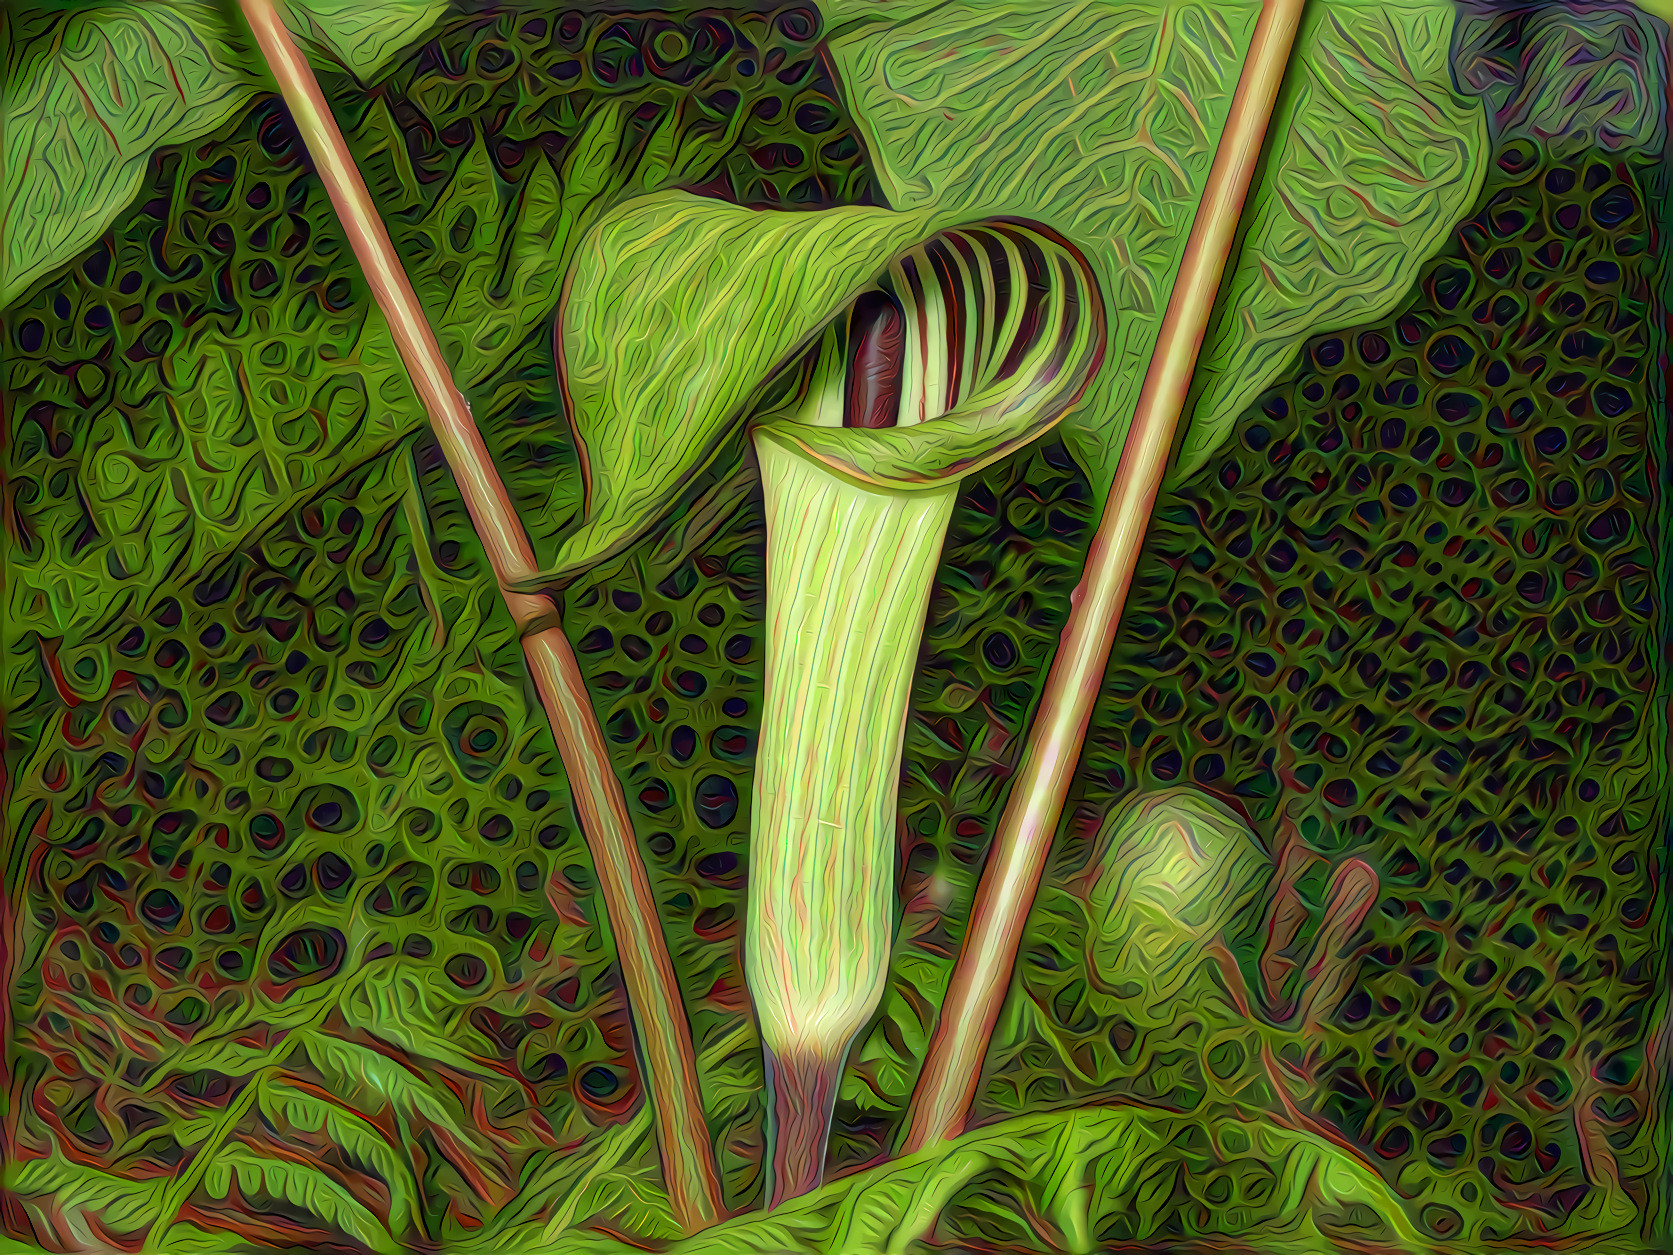 It's Sunday - Jack in the Pulpit